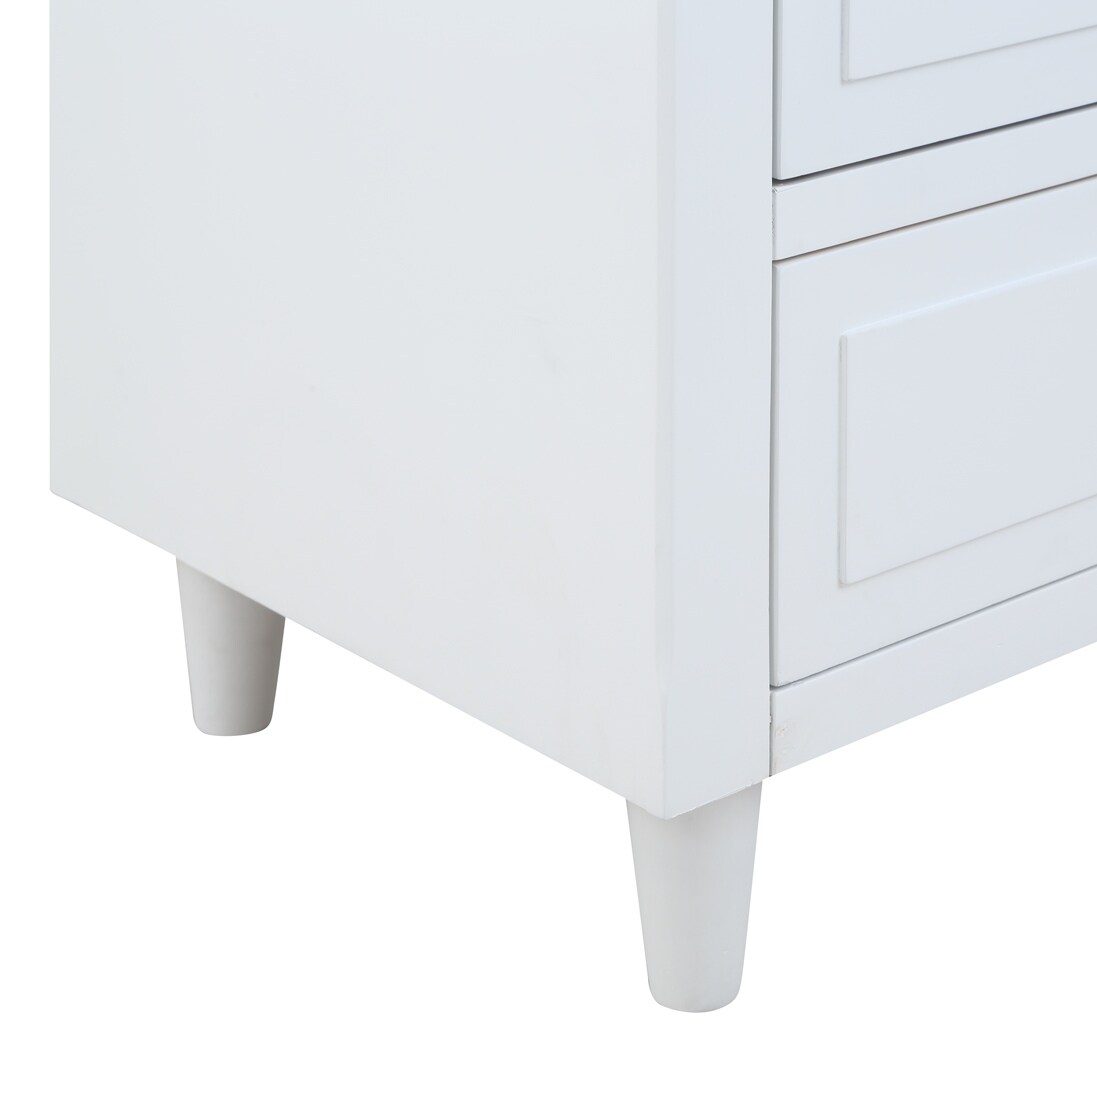 Cabinet,3 Drawer,3 Doors,Side Table,Storage Space,White - On Sale - Bed  Bath & Beyond - 35733999